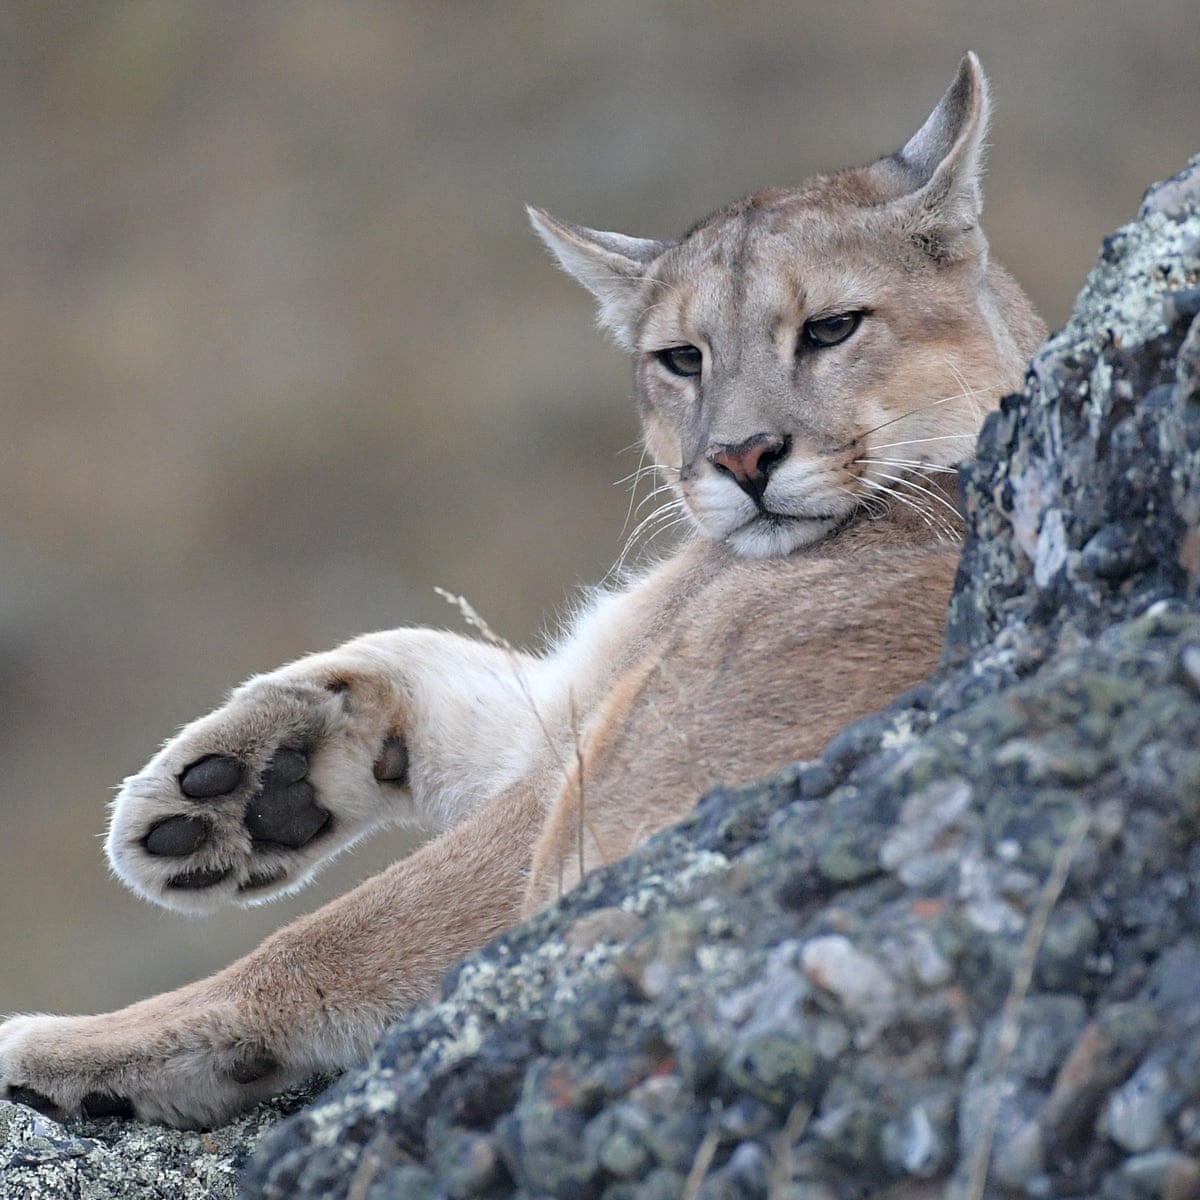 Top cat: why the puma is a leading influencer in the animal kingdom |  Americas | The Guardian